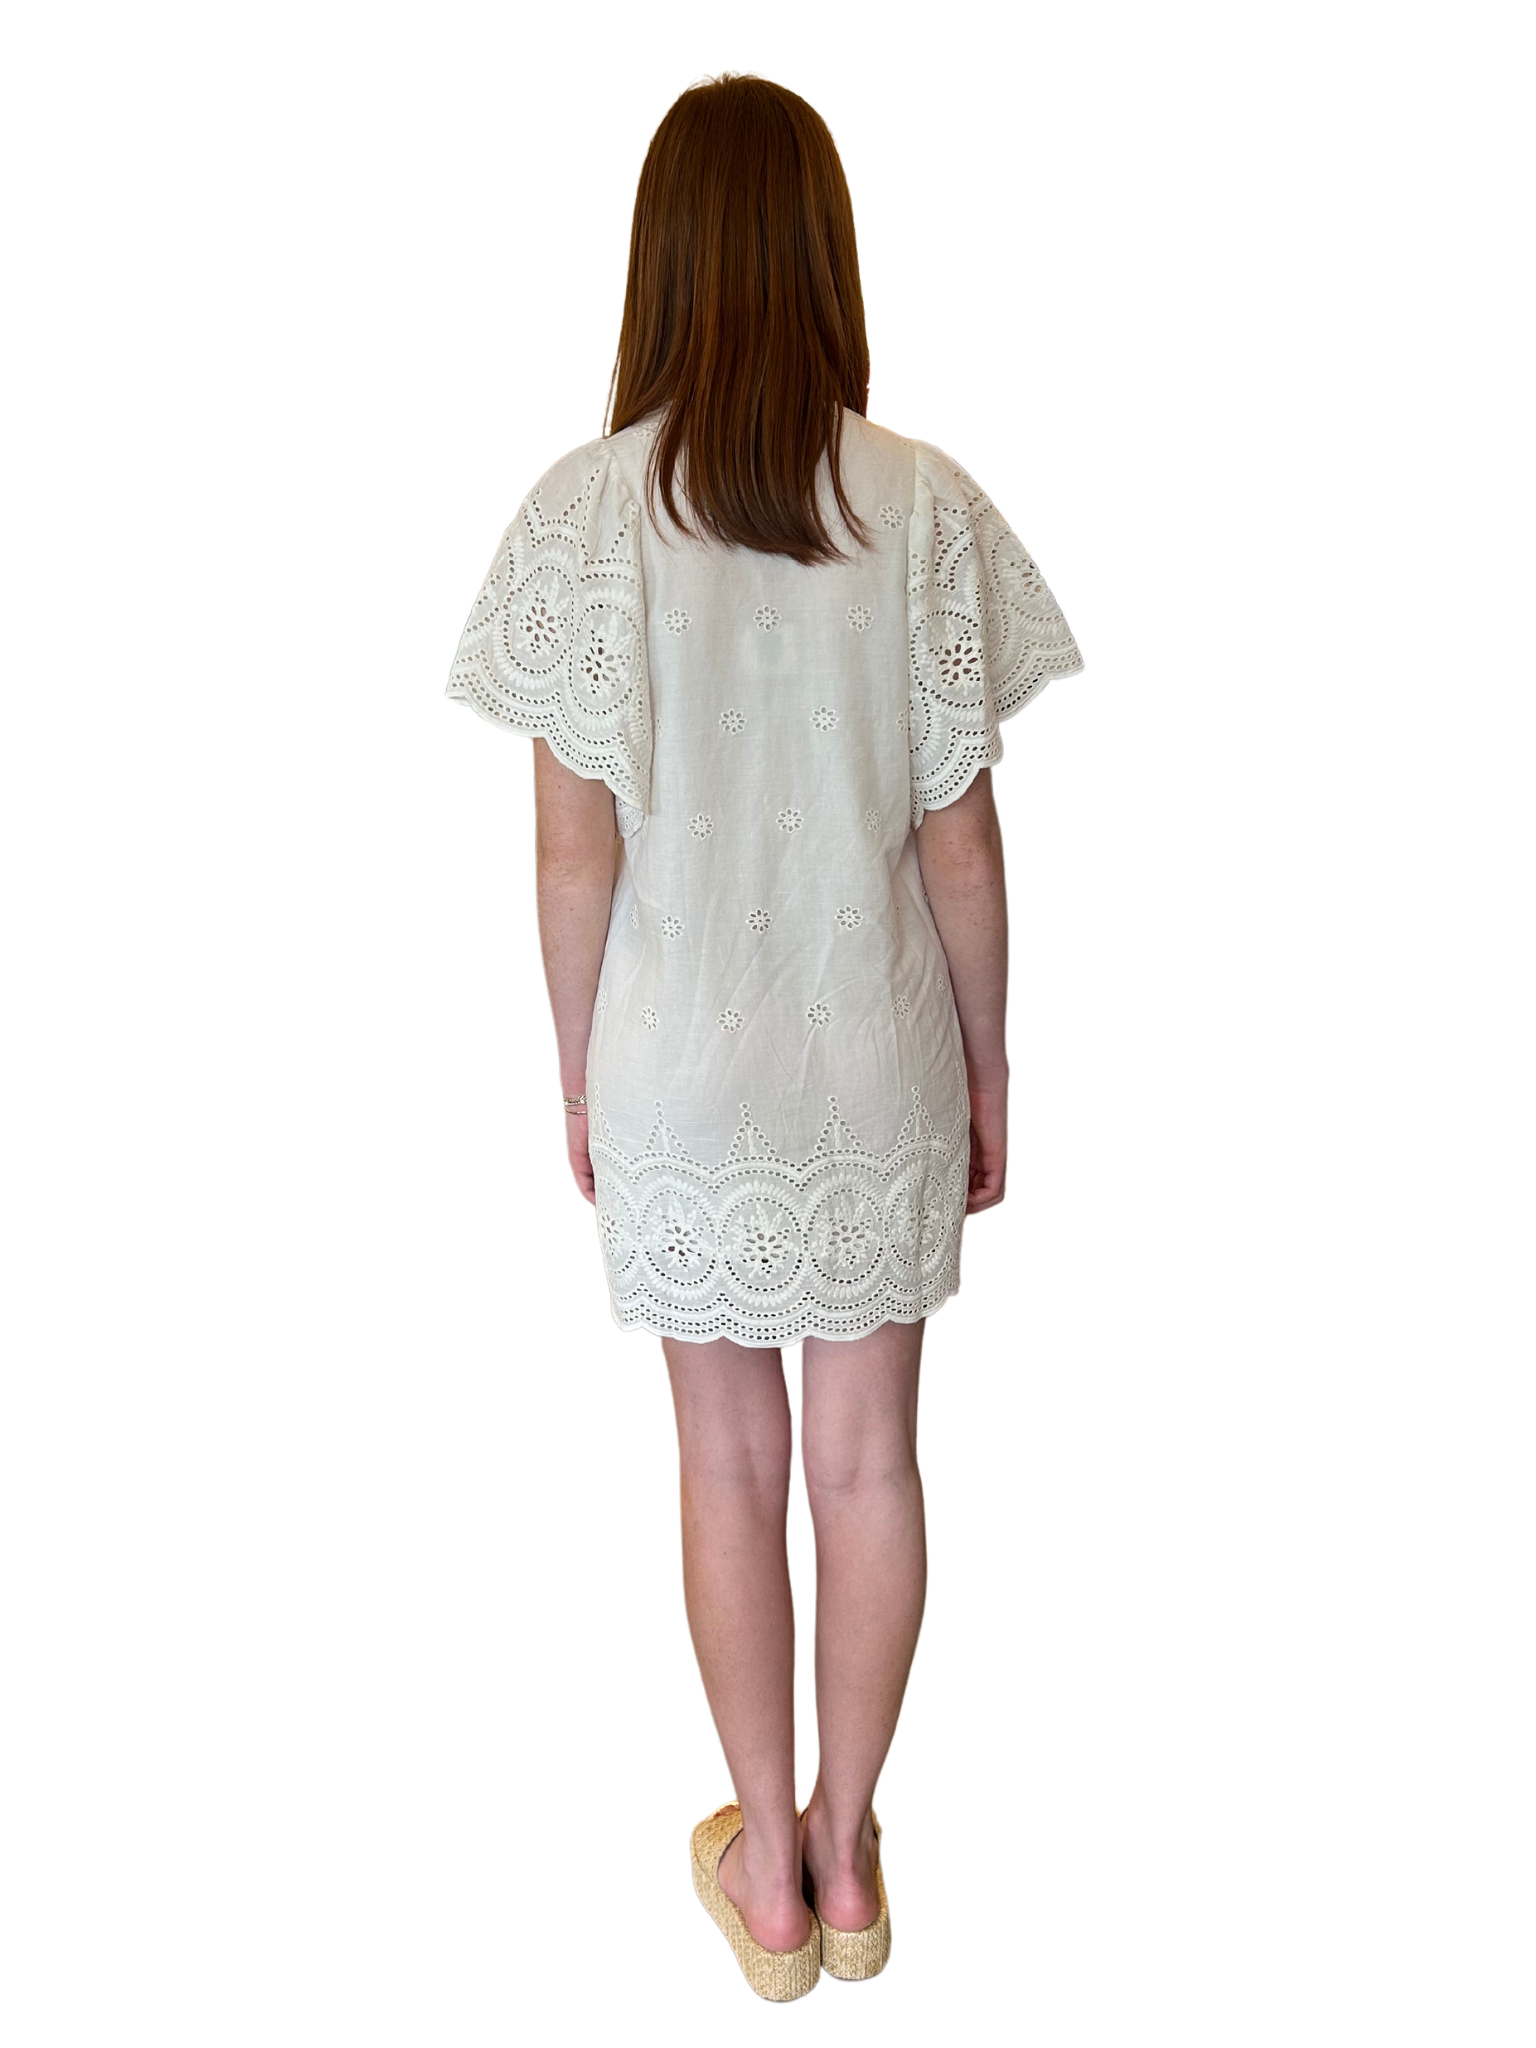 Amp up your summer style with the Angel Eyelet Dress by Bell Collectiton. Featurning&nbsp; flutter sleeves and playful tassel detailing. You'll be the belle of the beach in this unique and charming piece from Bell Collection!